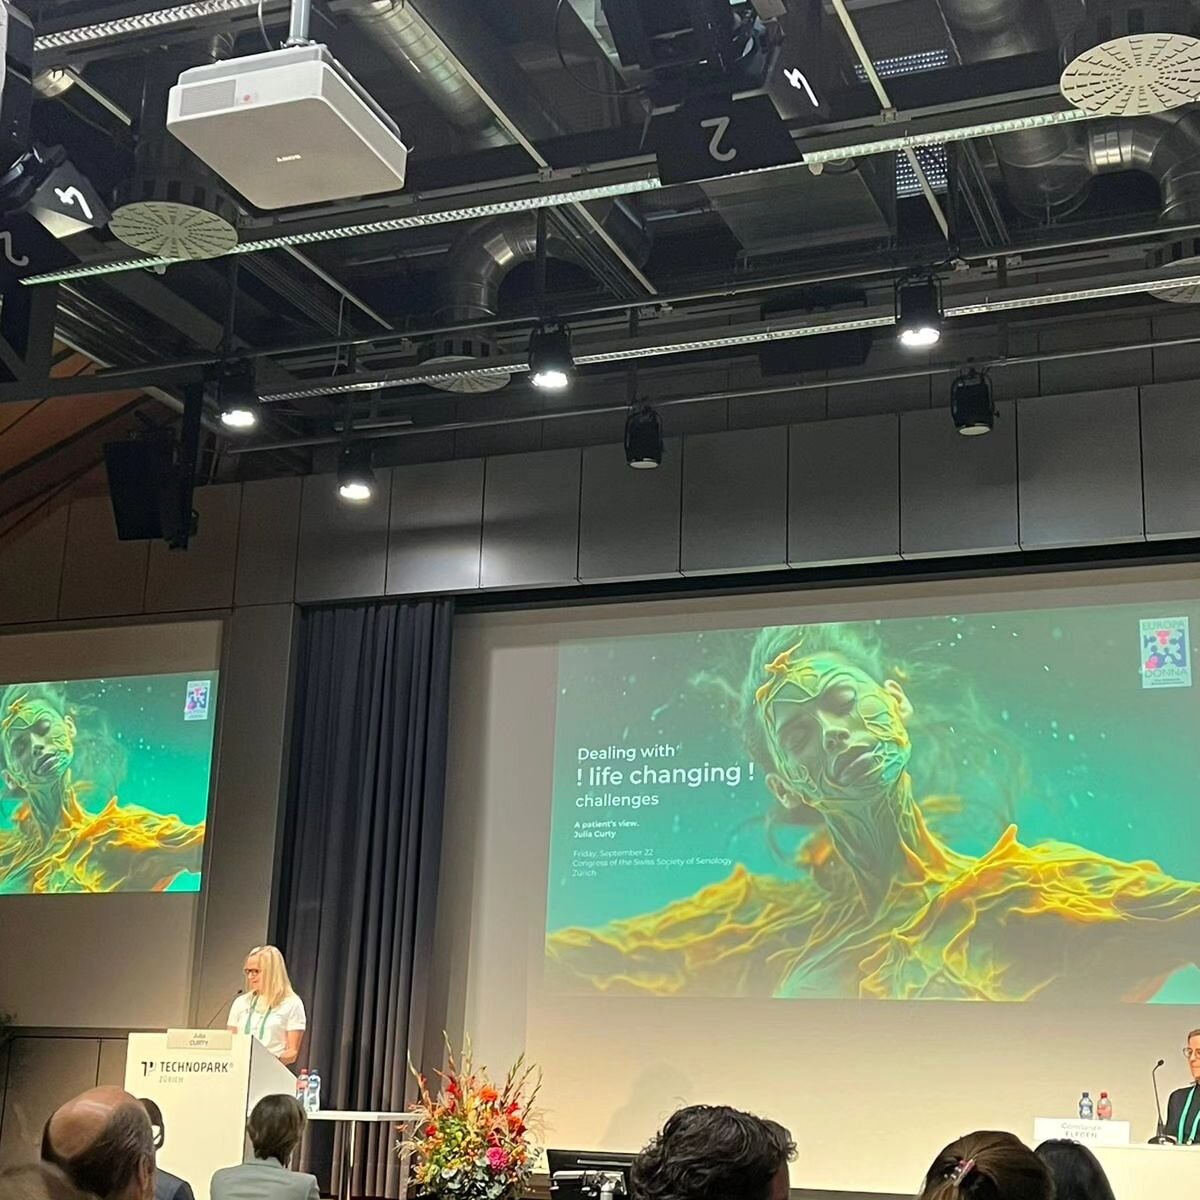 Today, I had the honor to share my thoughts concerning challenges as a breast cancer survivor at the Annual Congress of the Swiss Society of Senology at the Technopark in Zurich. Raising awareness and talking about patients' obstacles were the main t